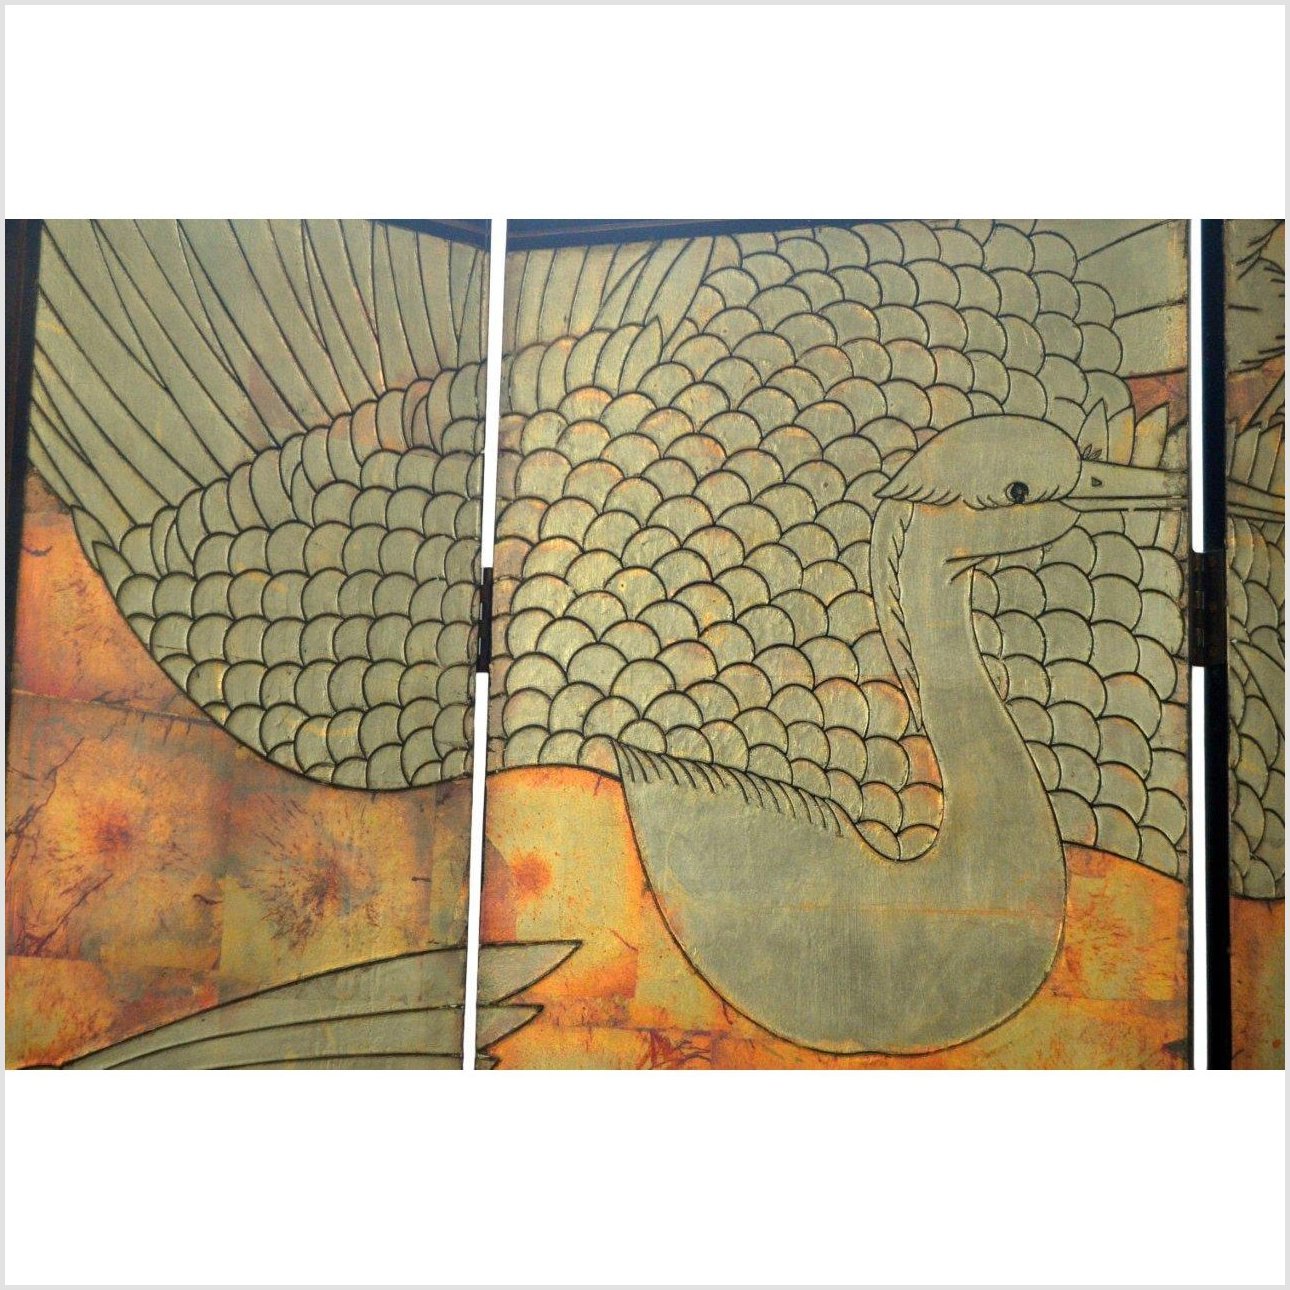 6-Panel Screen Depicting Cranes in Gold, Jade and Black Tones-YN2789-8. Asian & Chinese Furniture, Art, Antiques, Vintage Home Décor for sale at FEA Home